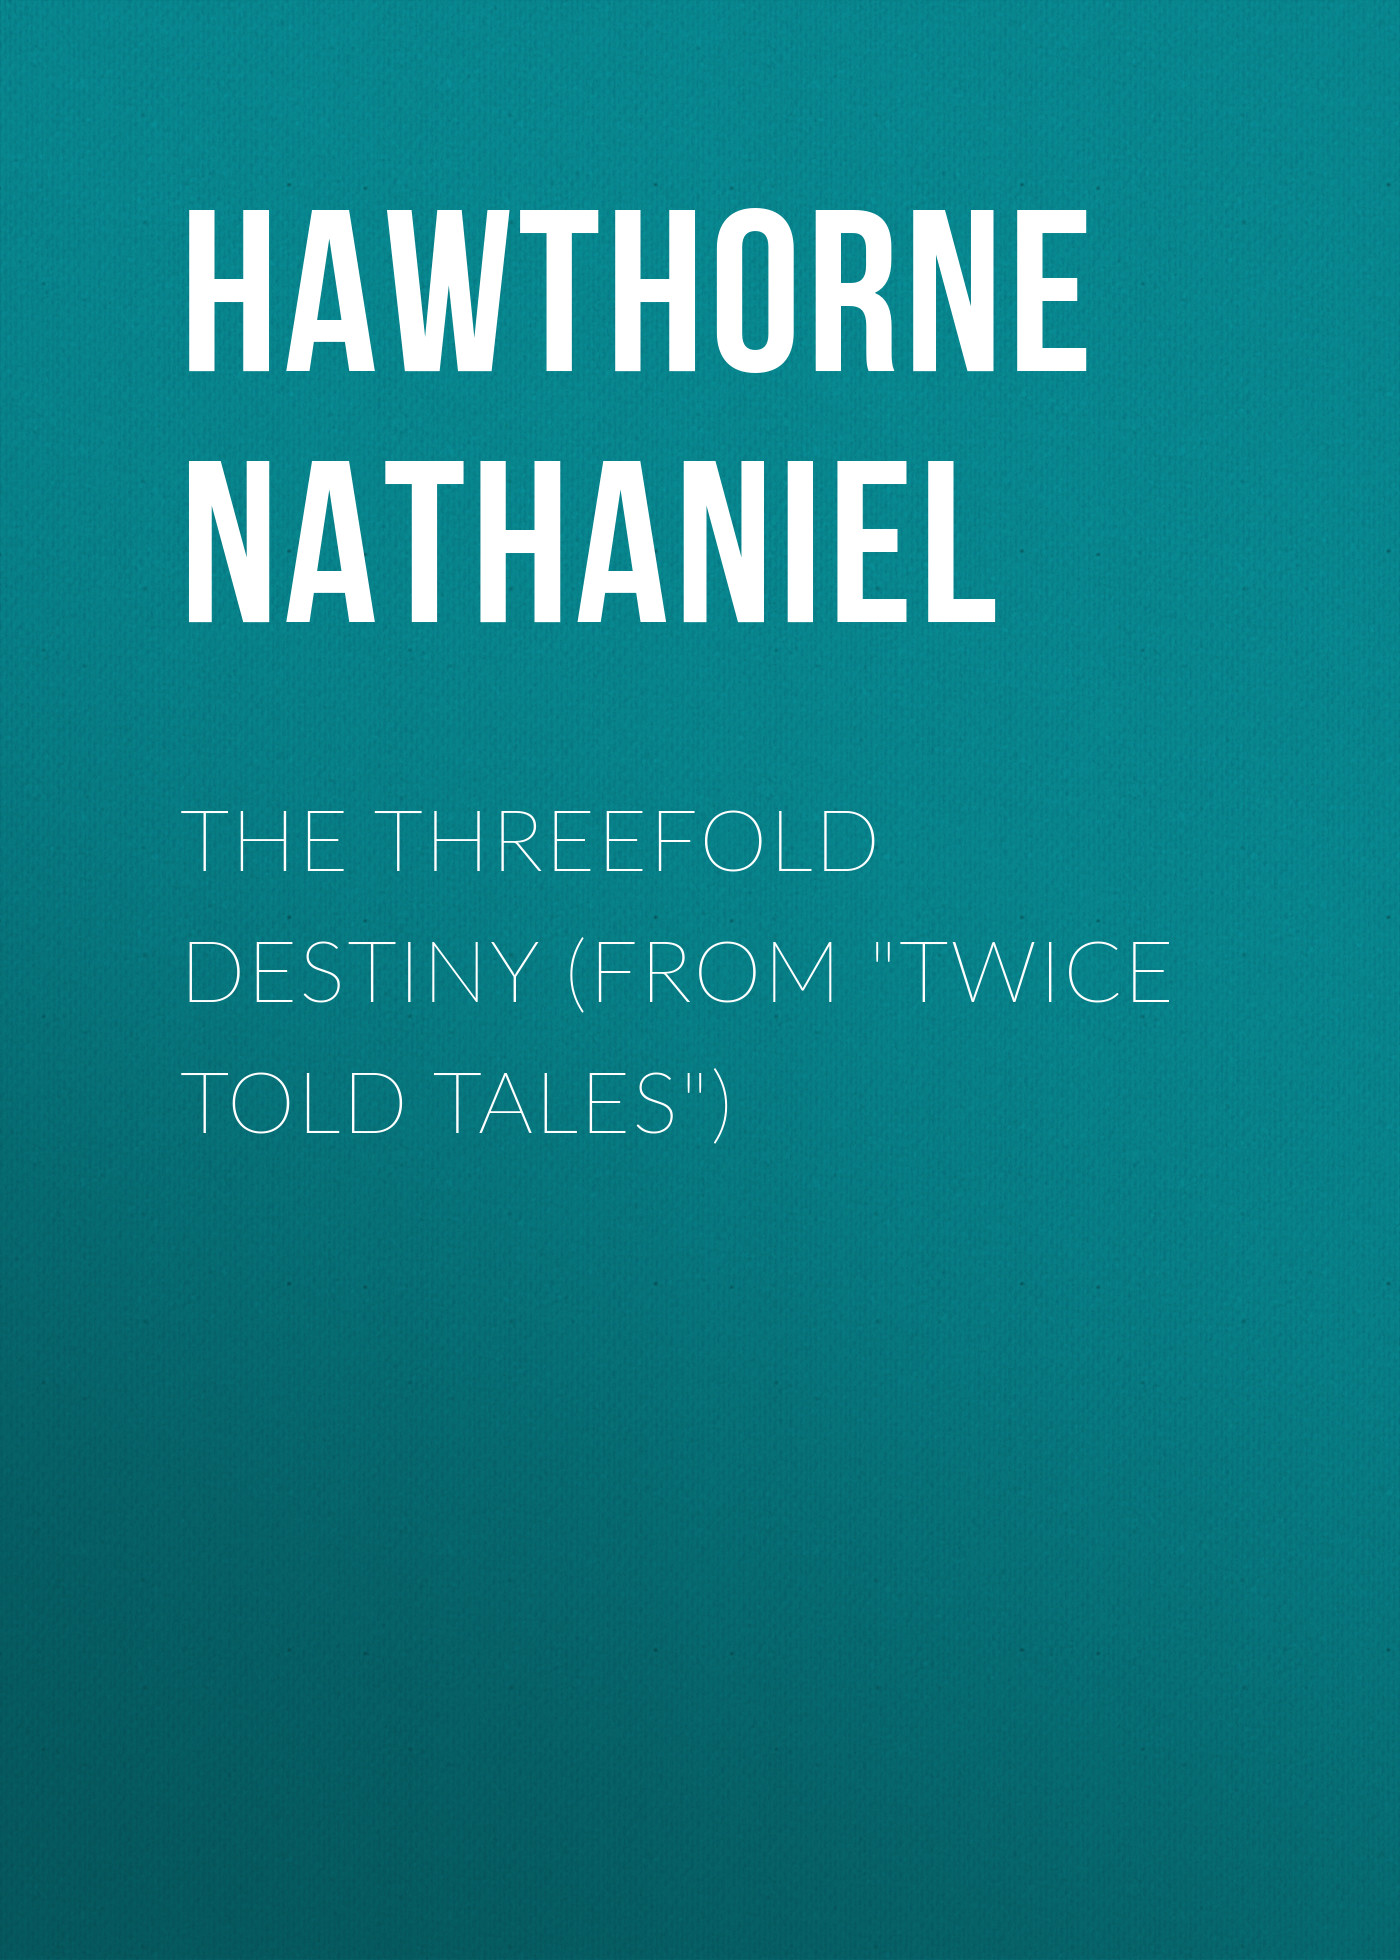 The Threefold Destiny (From"Twice Told Tales")